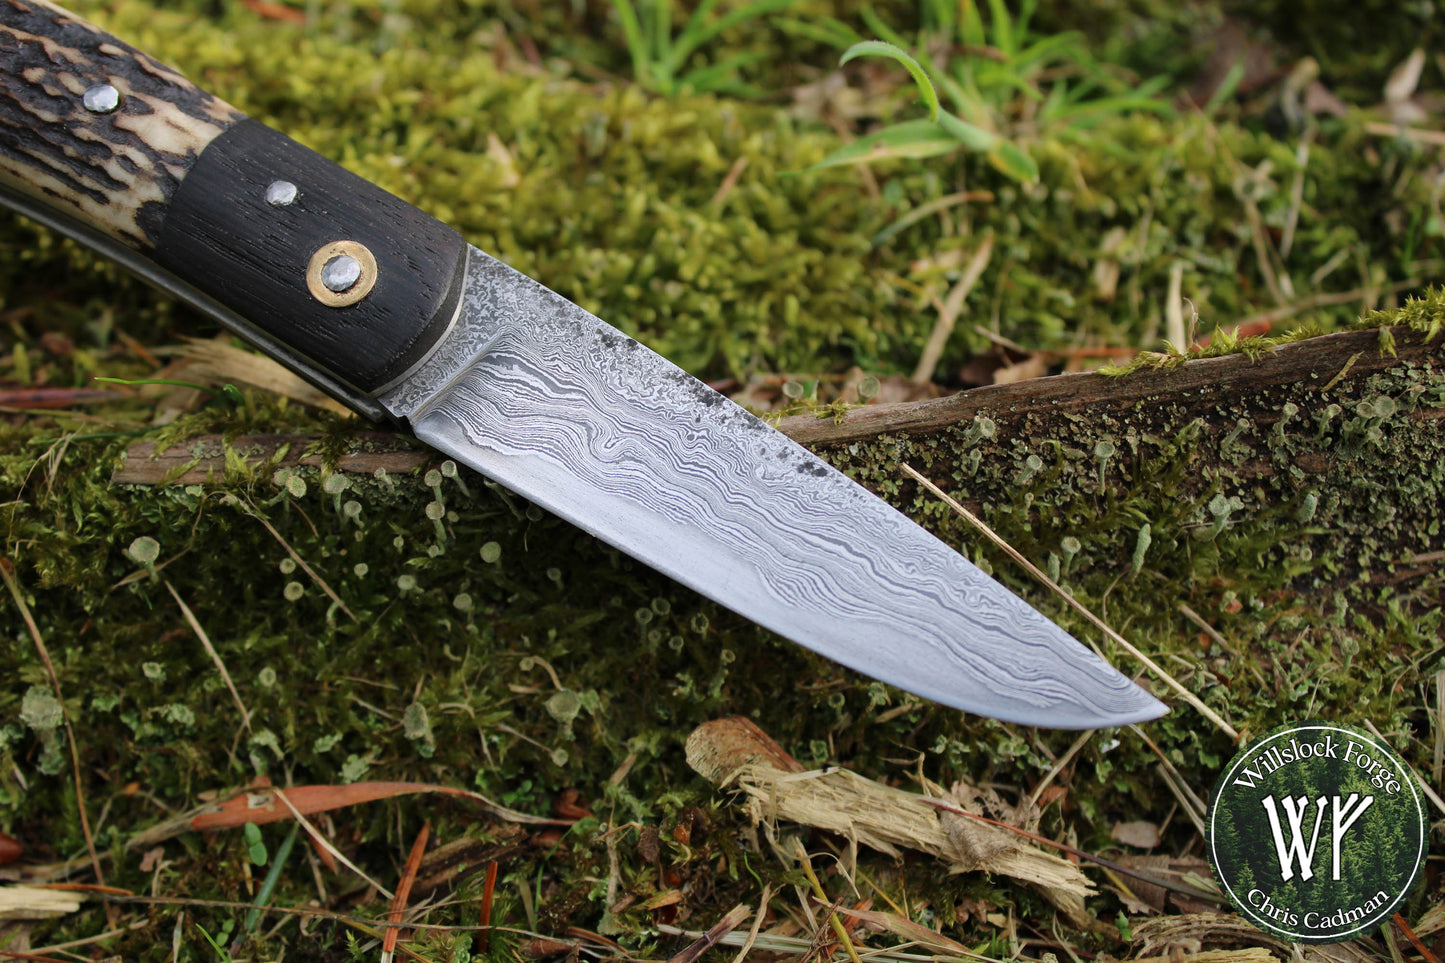 Hand-Forged San Mai Damascus Slipjoint with Bog Oak & Stag Antler Scales / UK Legal Carry